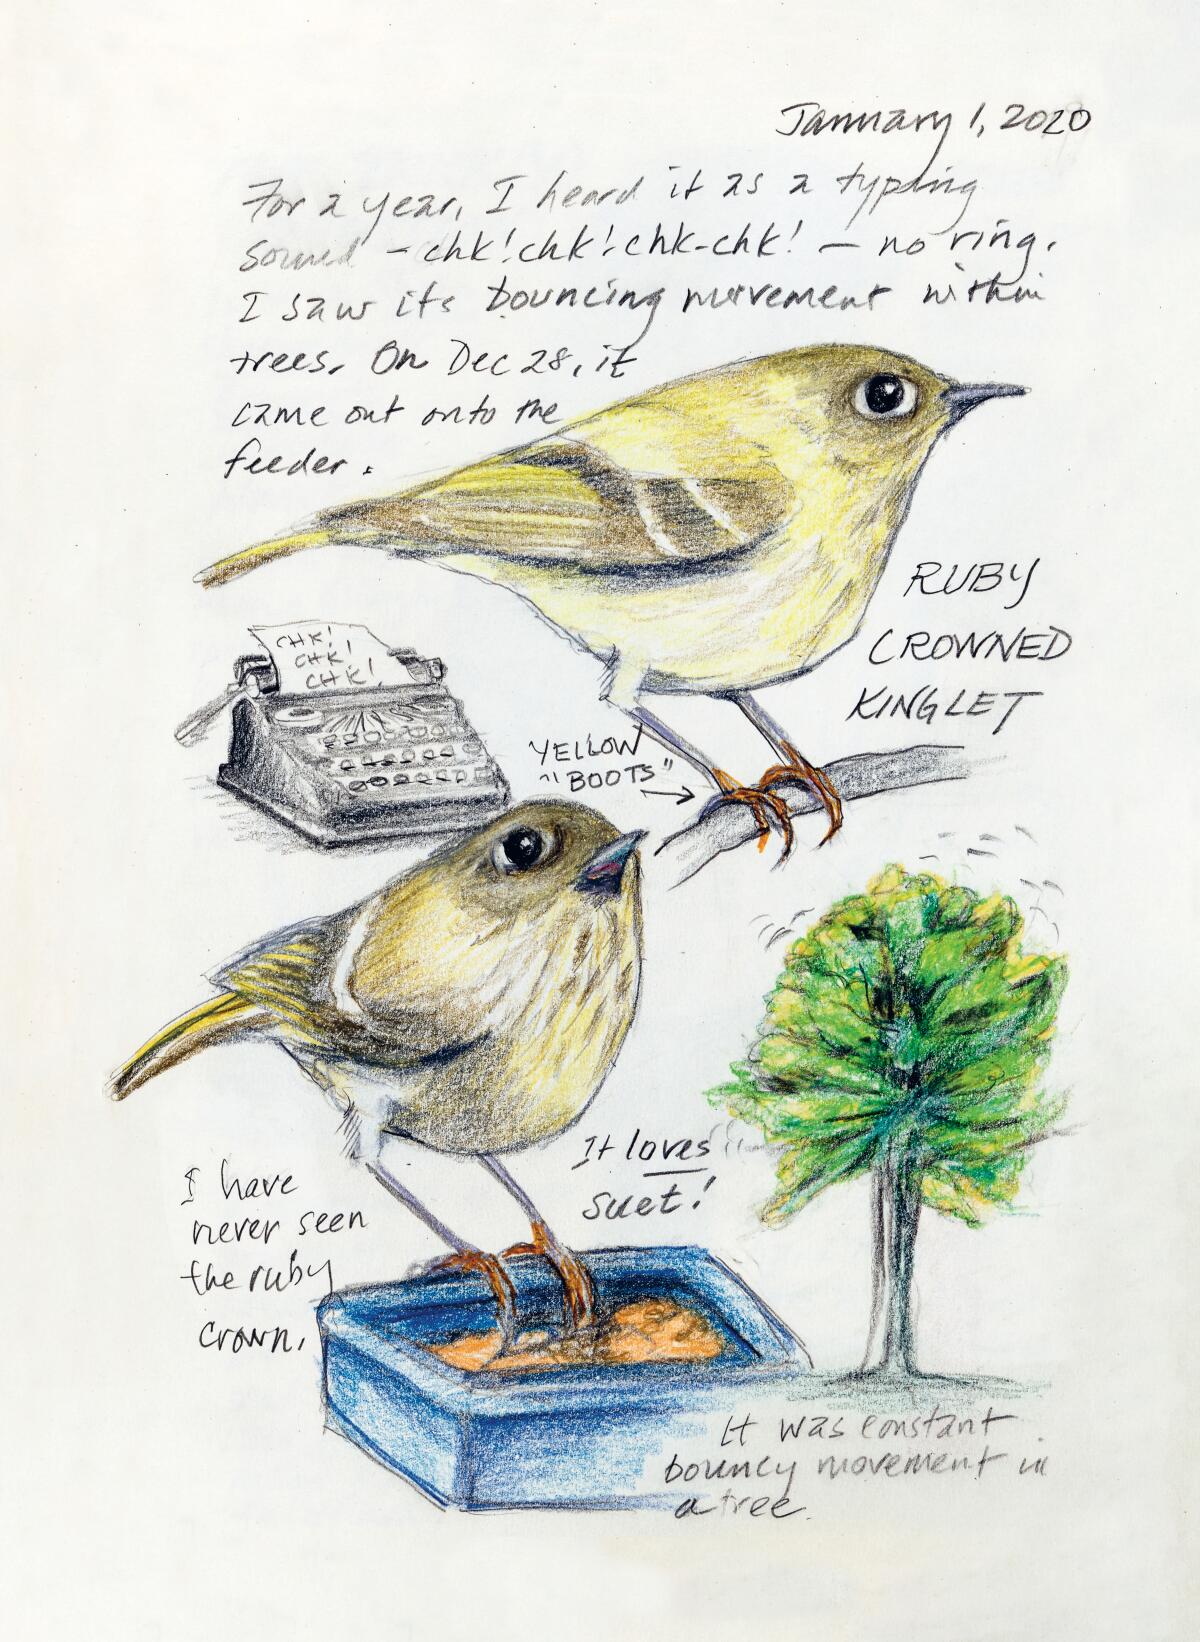 A sketch and journal text about the ruby-crowned kinglet